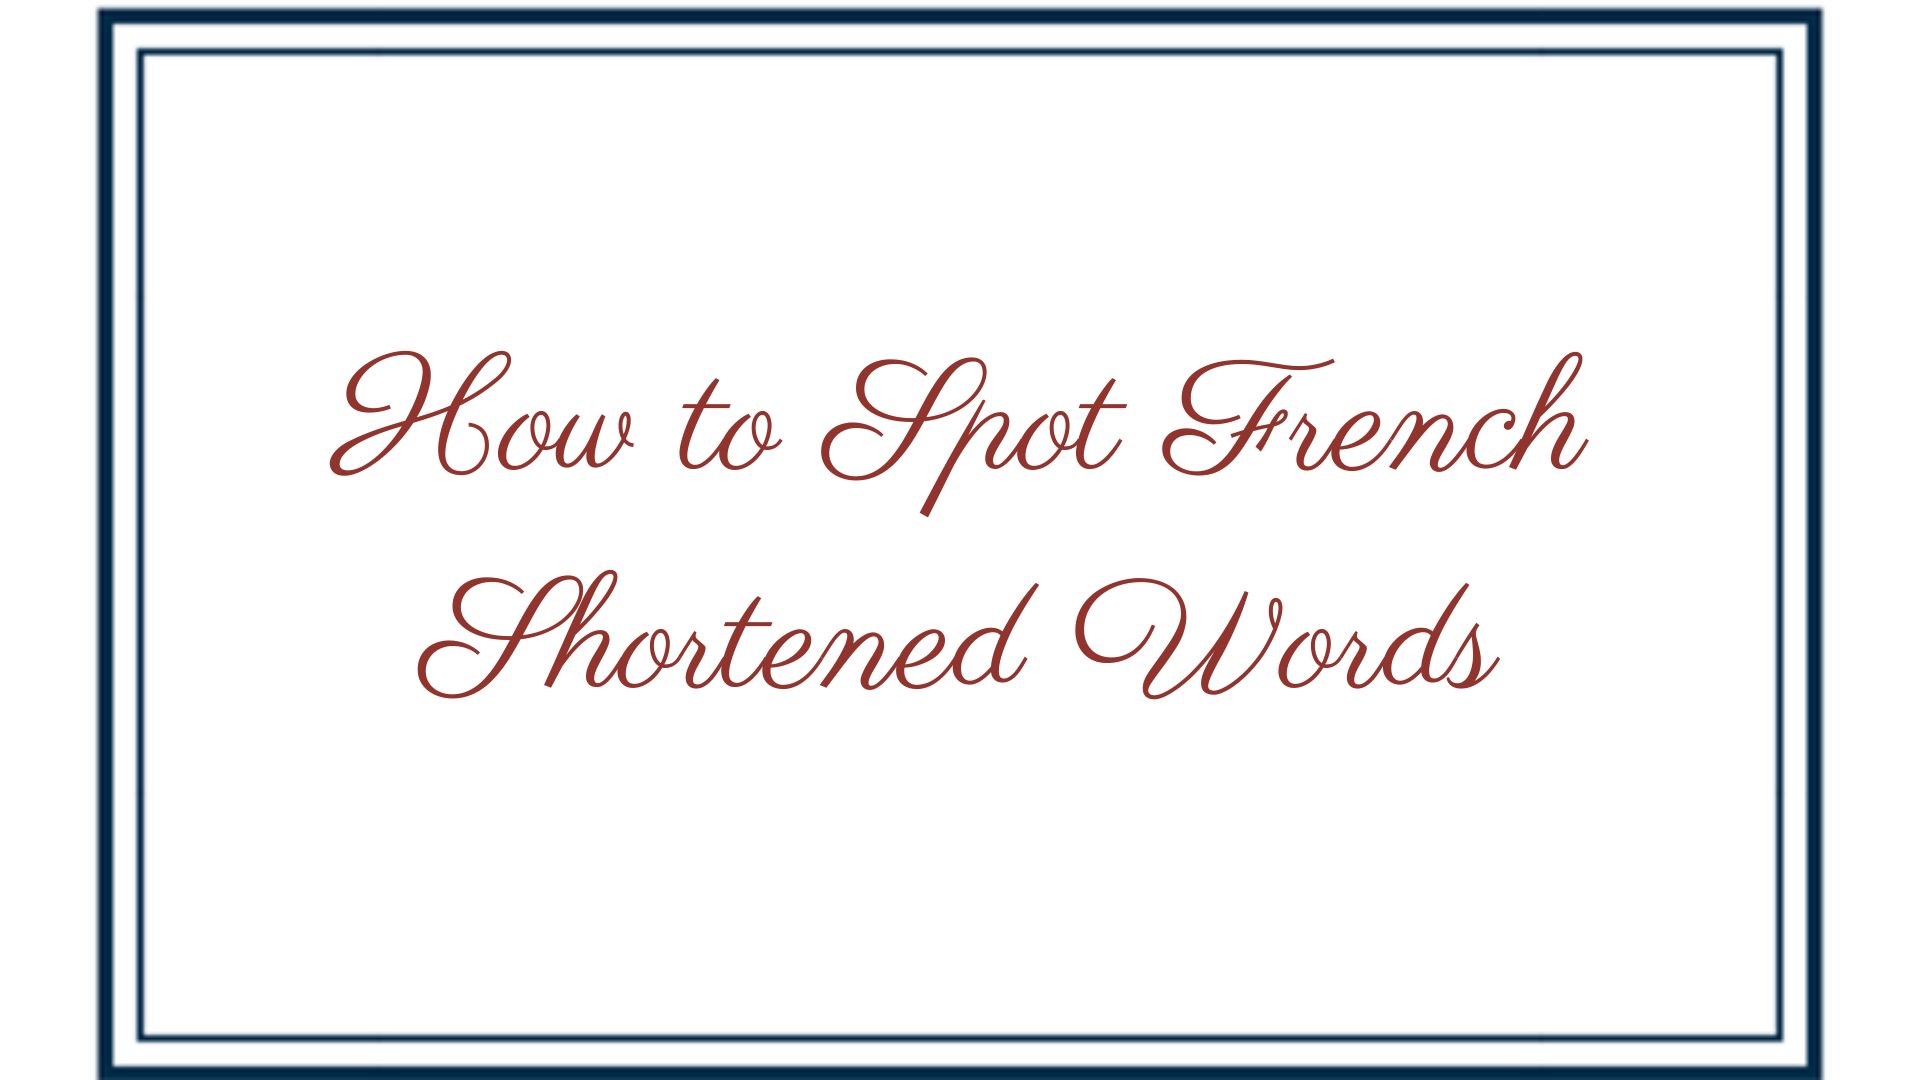 How to Spot French Shortened Words